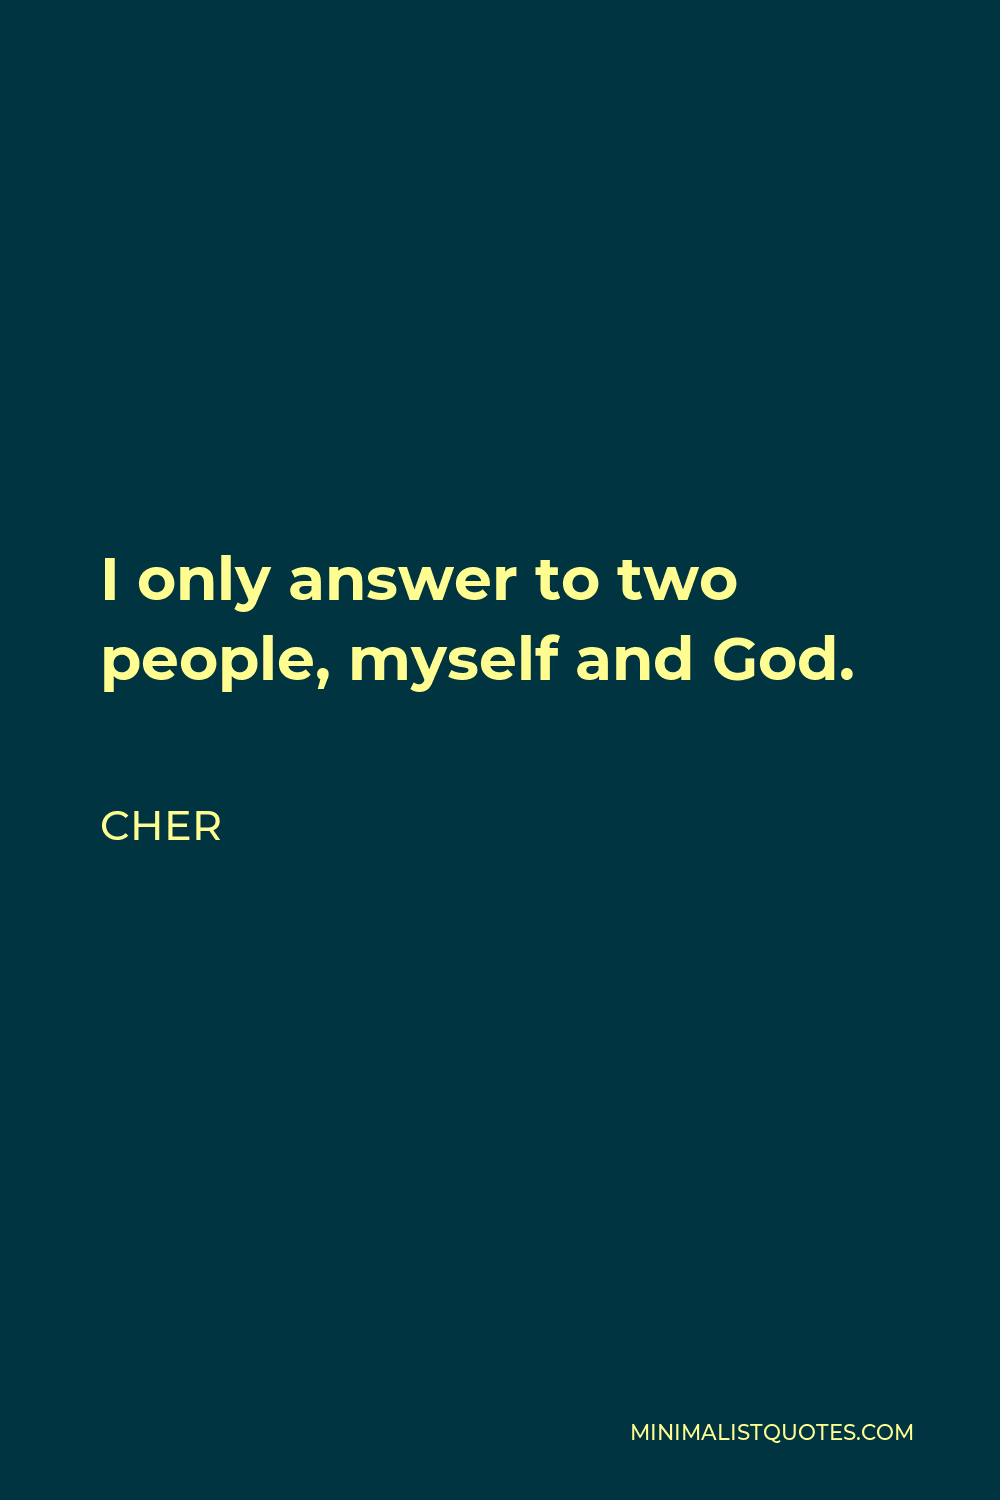 Cher Quote: I only answer to two people, myself and God.